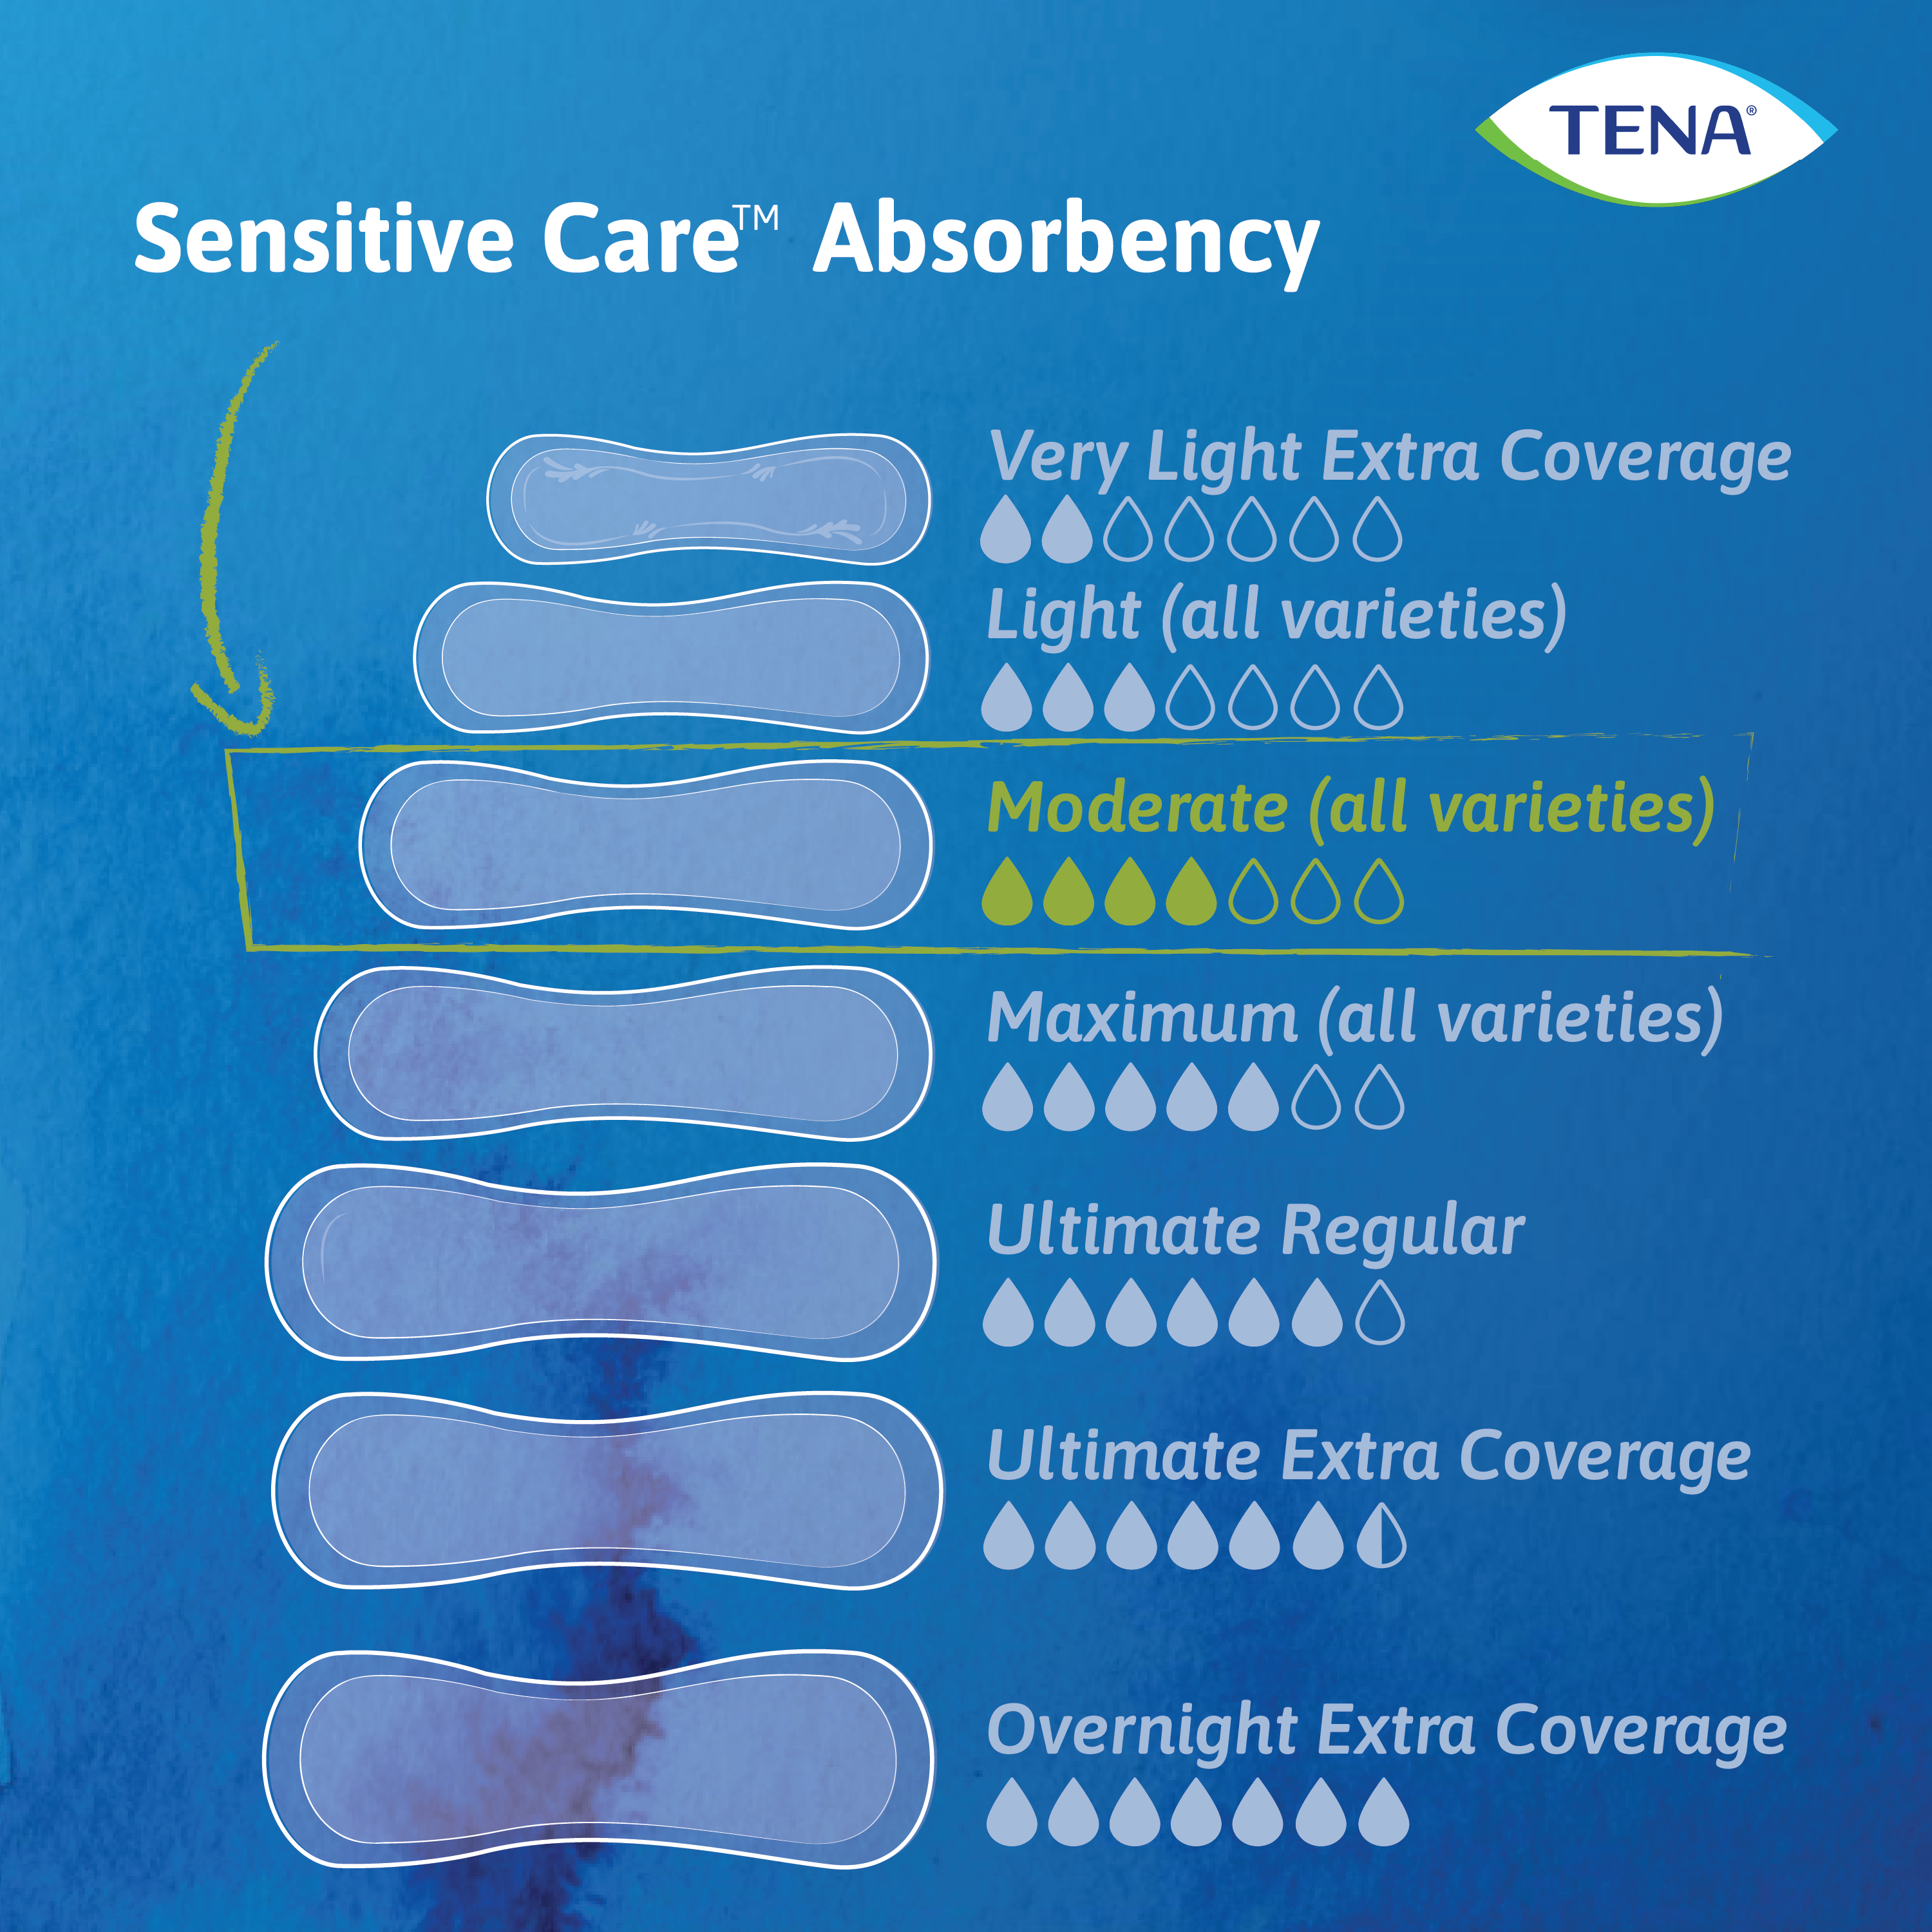 An absorbency chart shows moderate third on the chart